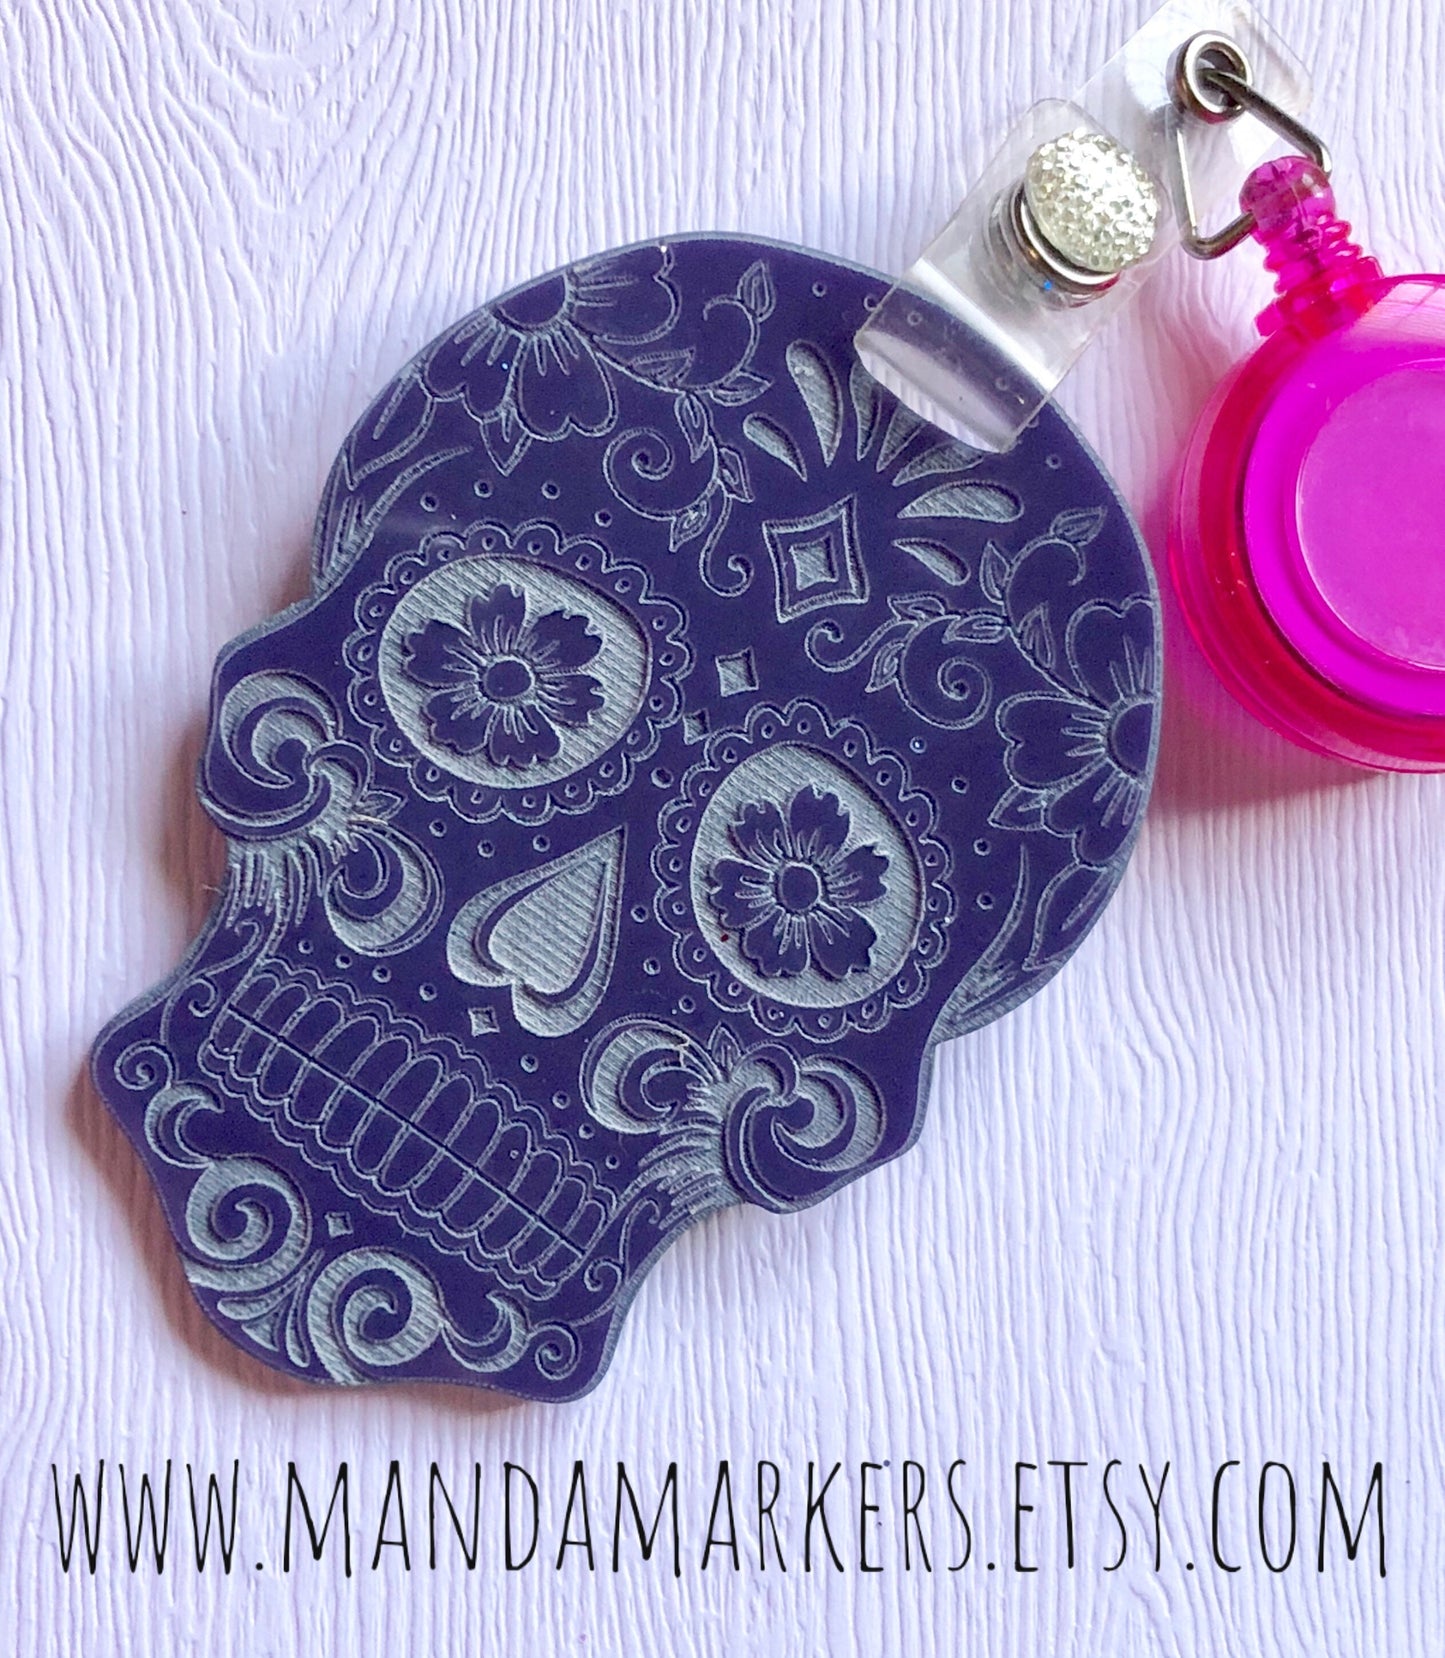 RadPad Etched Acrylic Sugar Skull for Holding Xray Markers